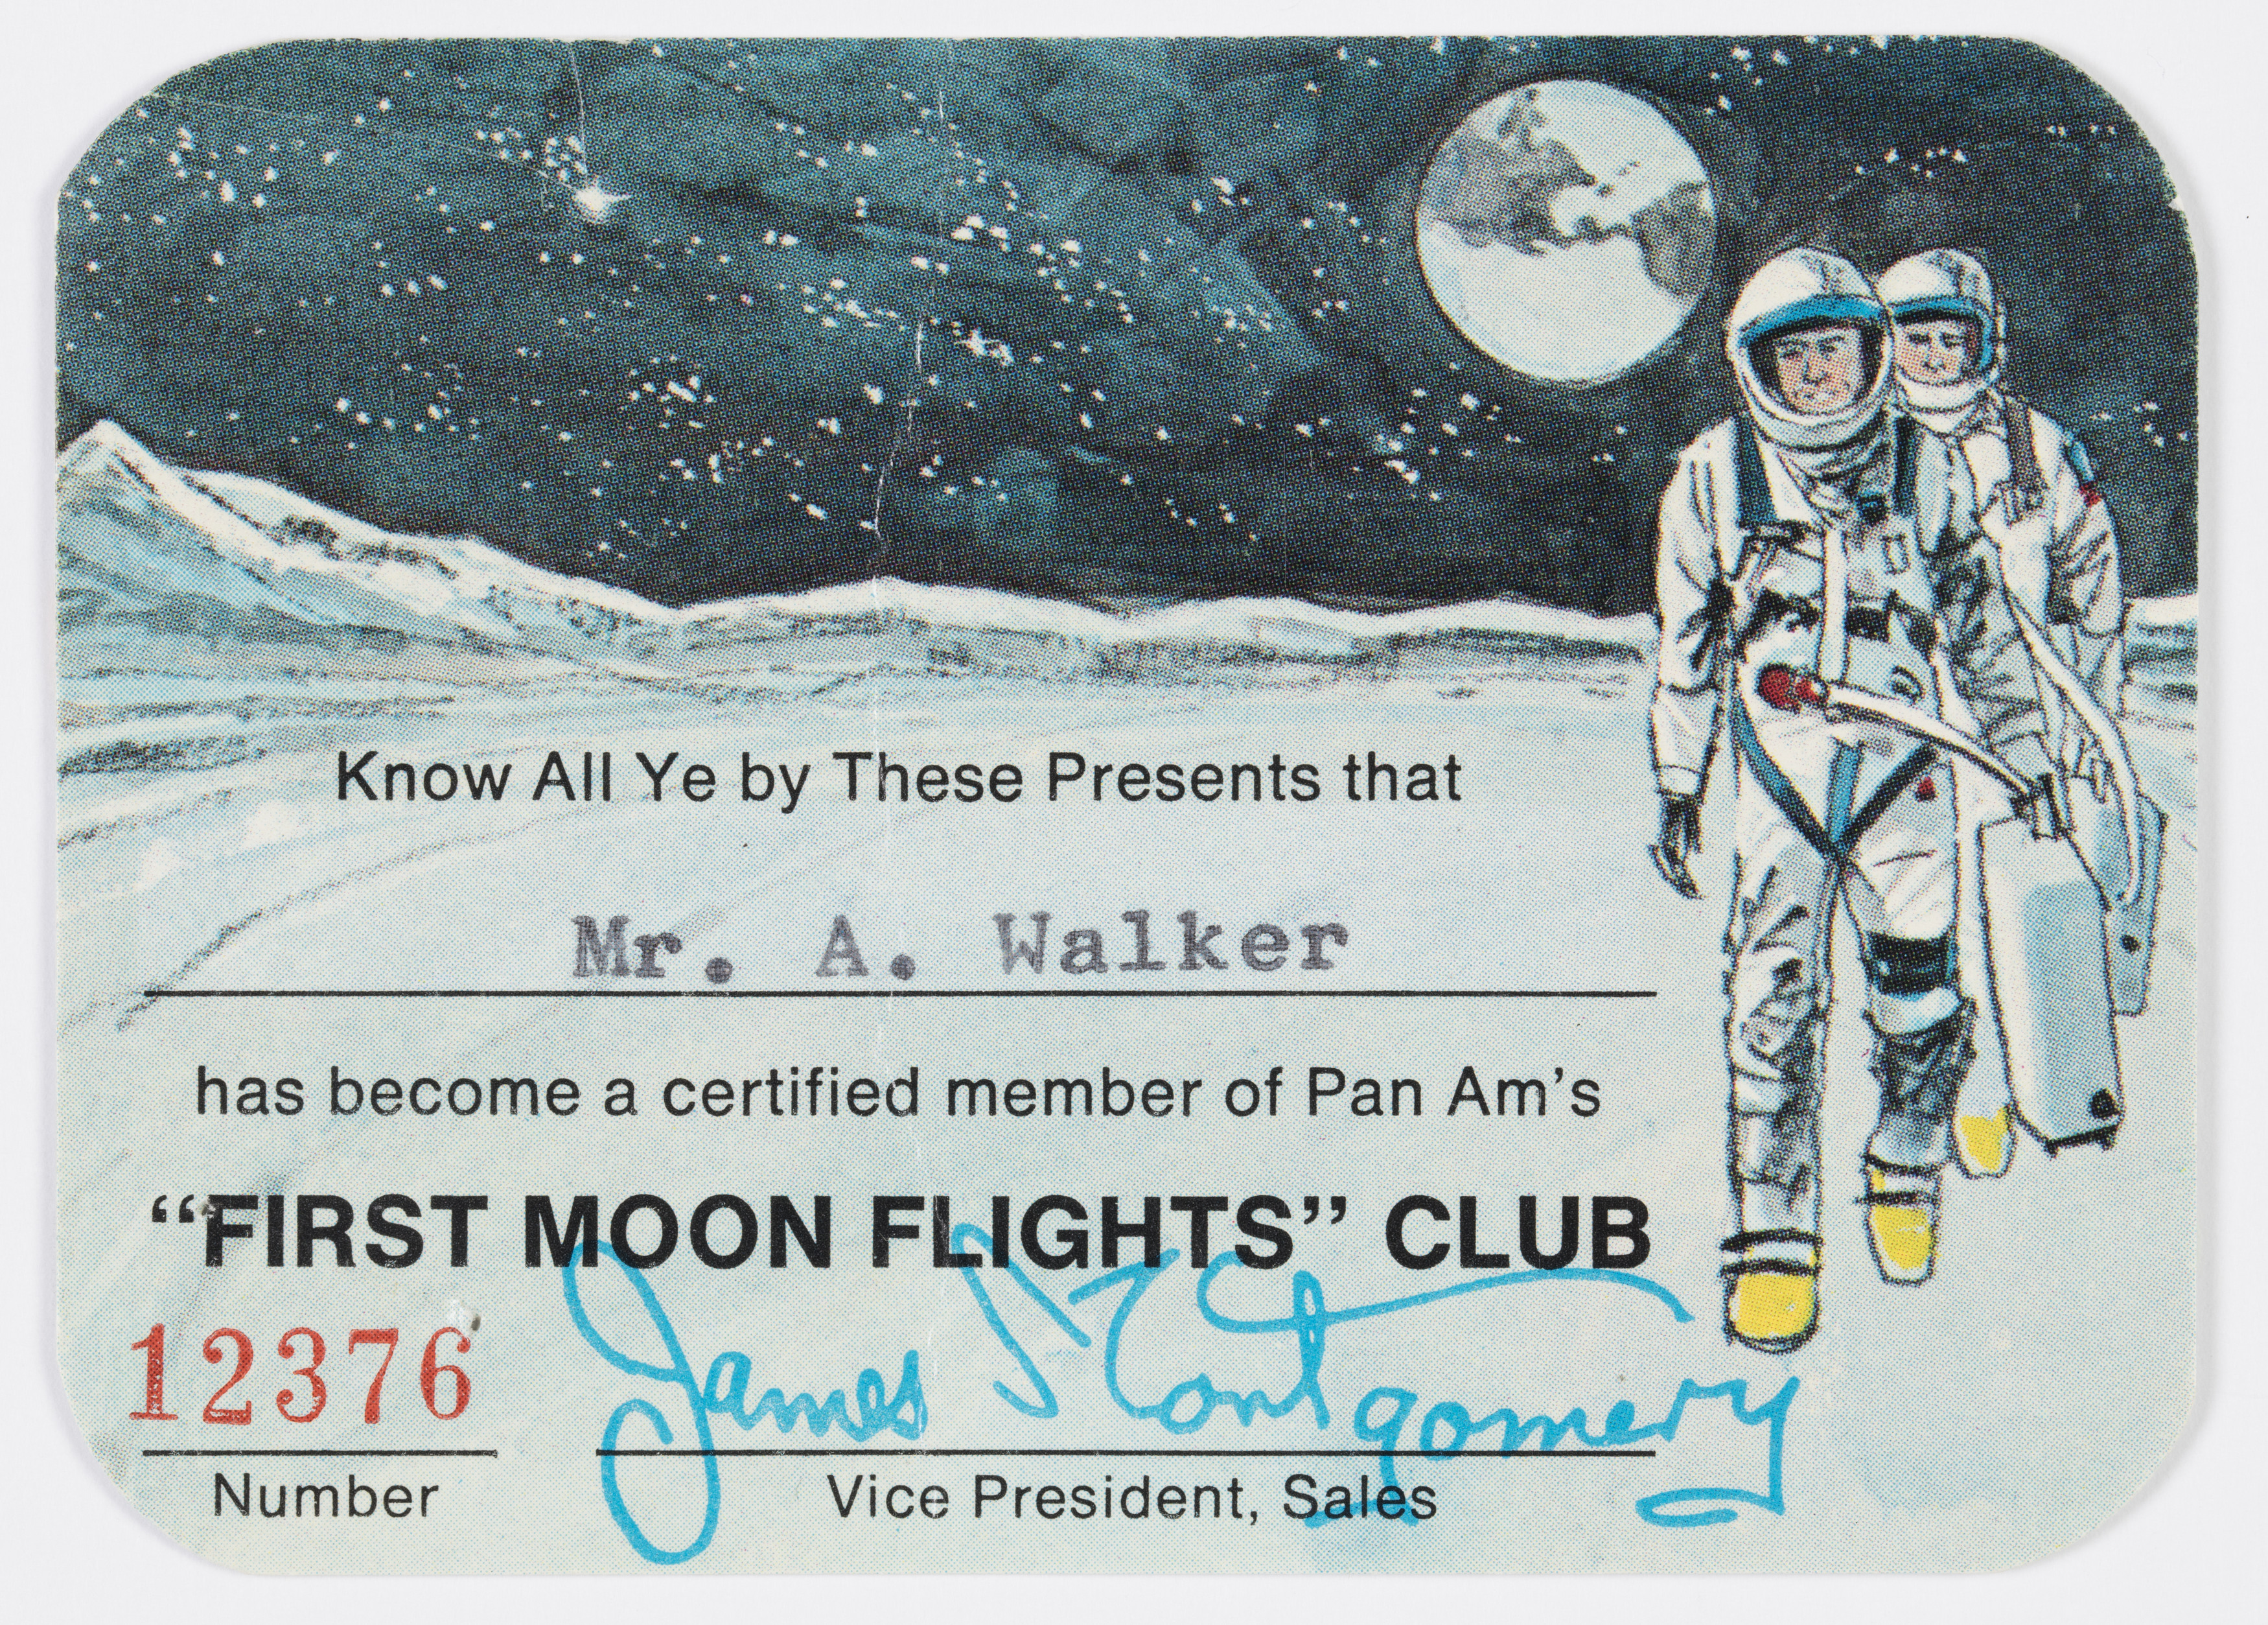 A membership card for the First Moon Flights Club.